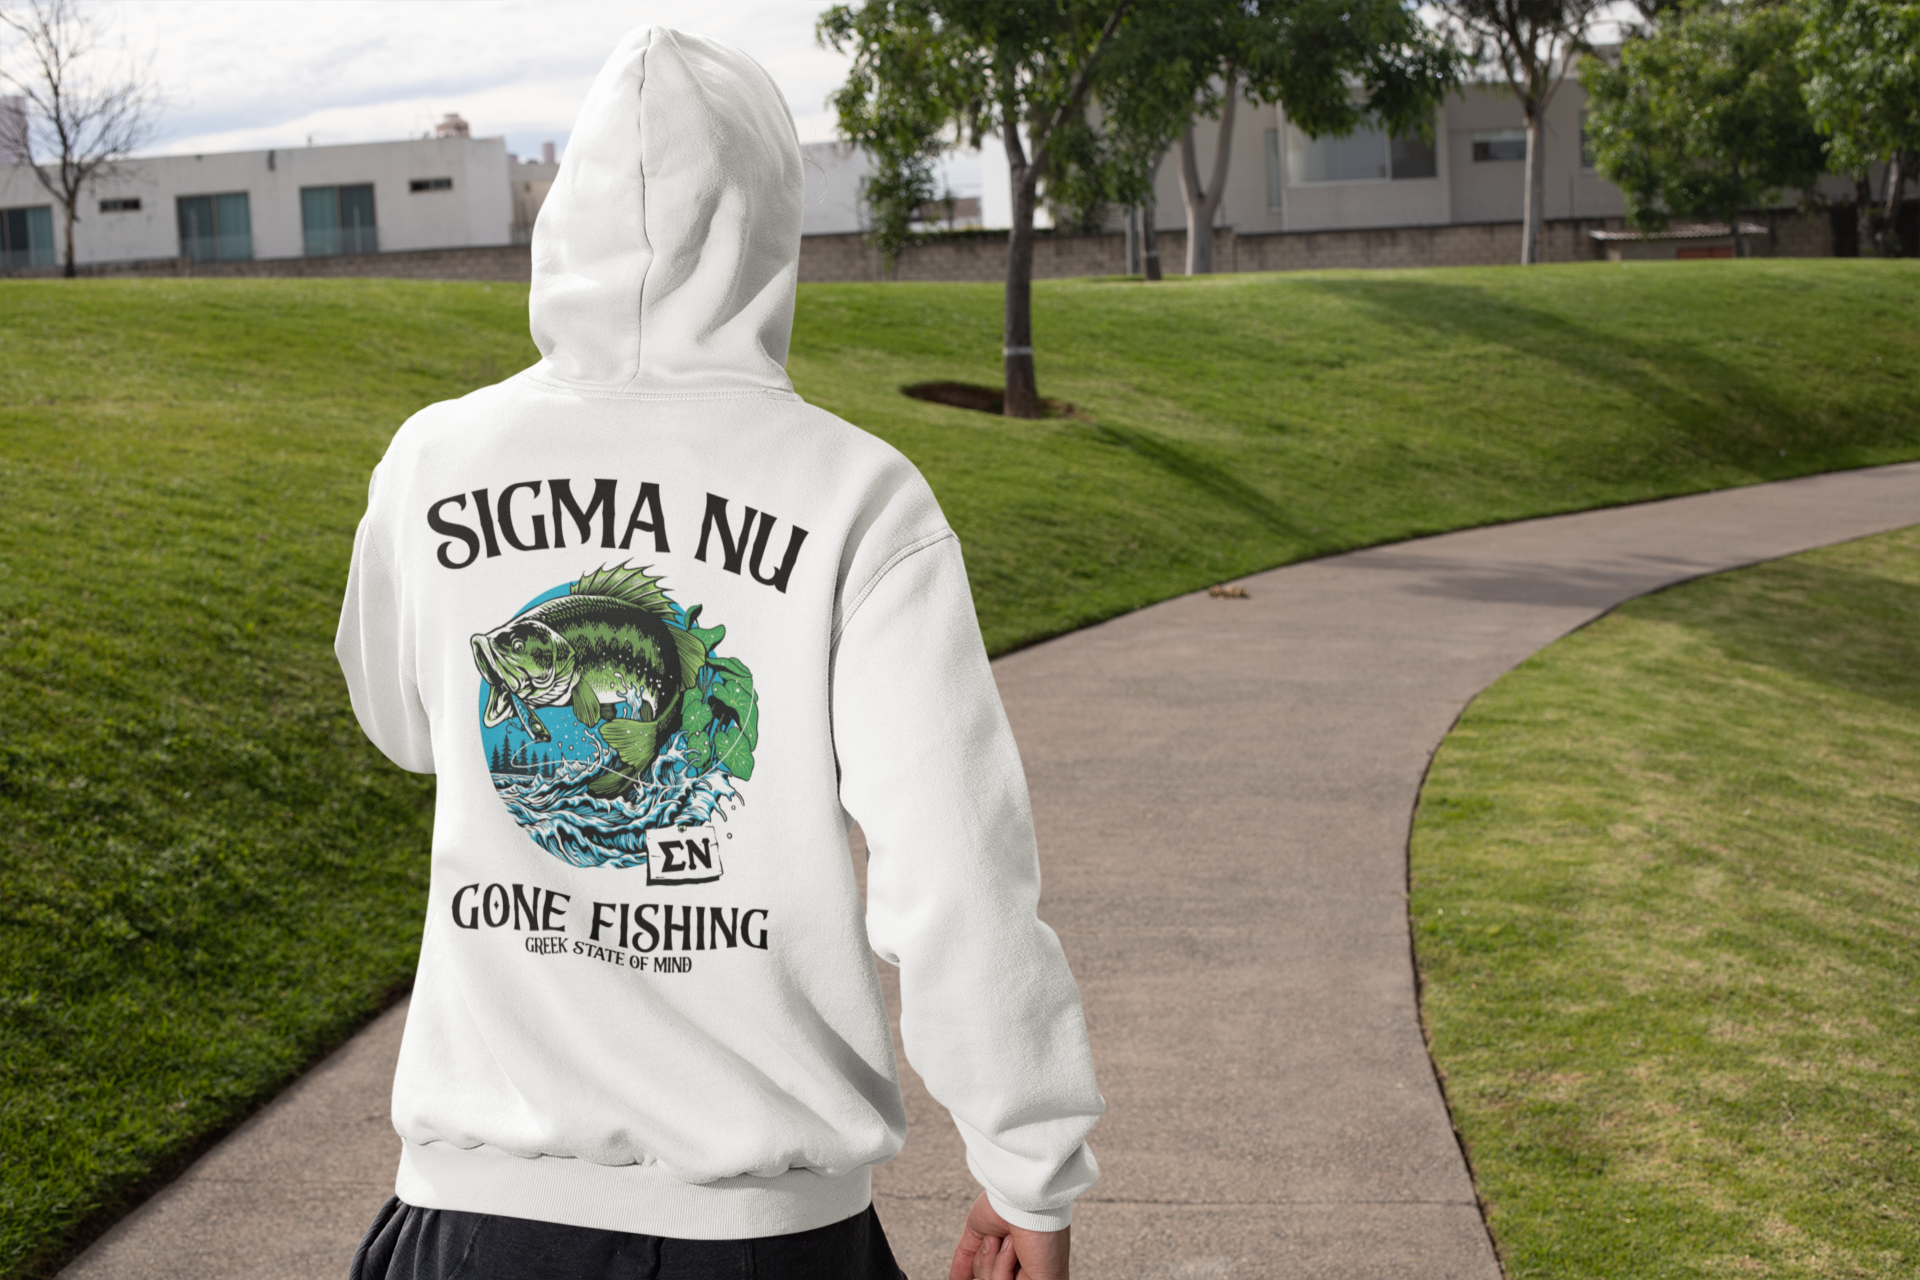 White Sigma Nu Graphic Hoodie | Gone Fishing | Sigma Nu Clothing, Apparel and Merchandise model 